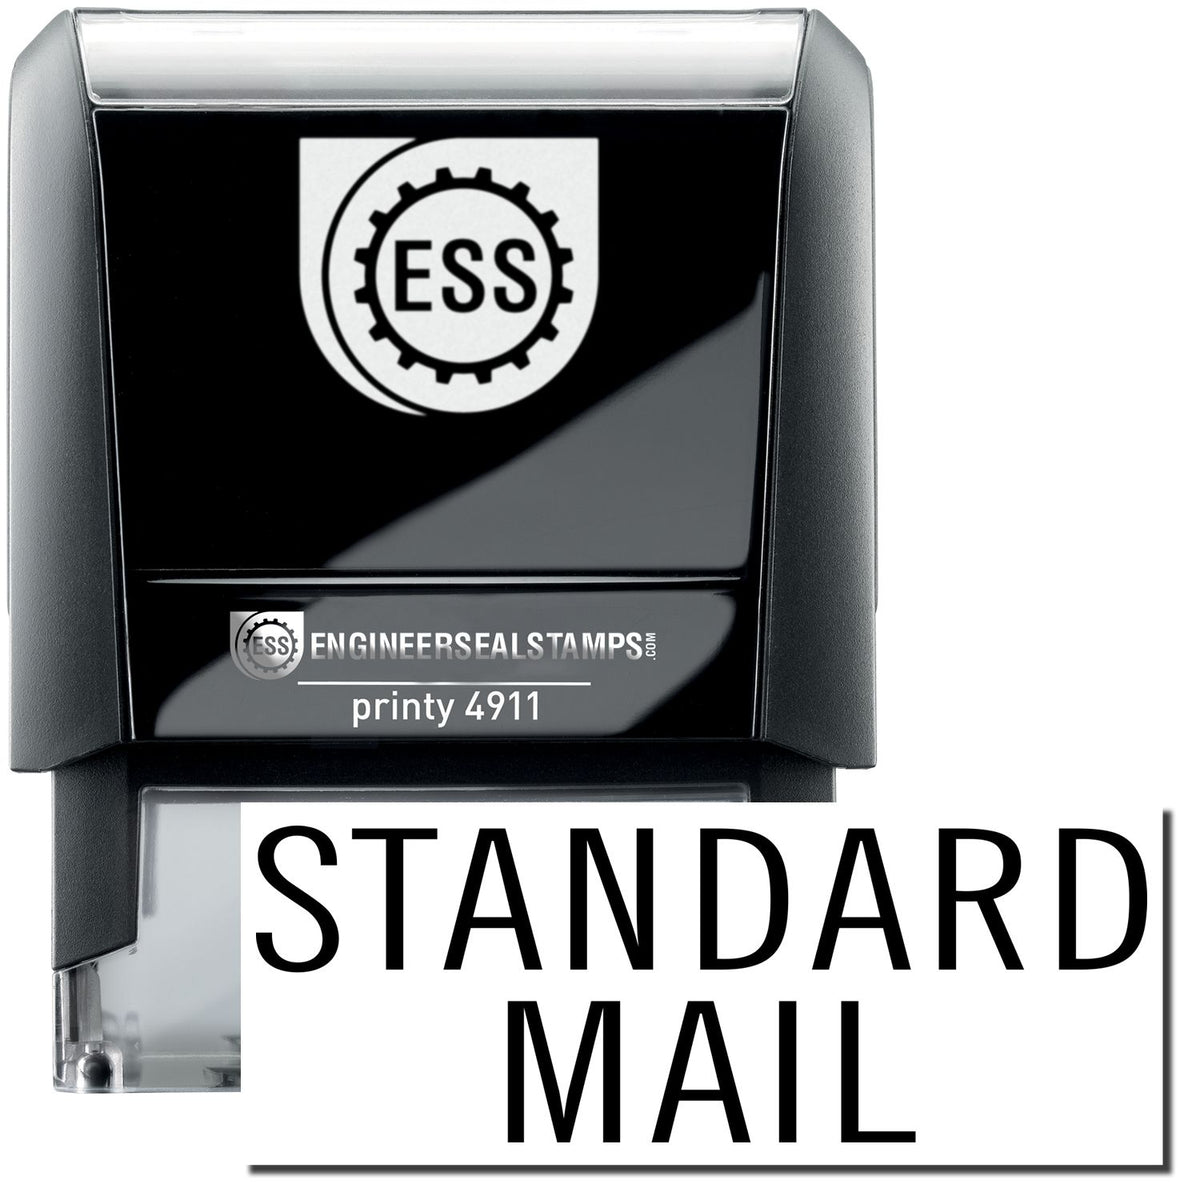 A self-inking stamp with a stamped image showing how the text &quot;STANDARD MAIL&quot; in a stacked concept (takes up two lines) is displayed after stamping.